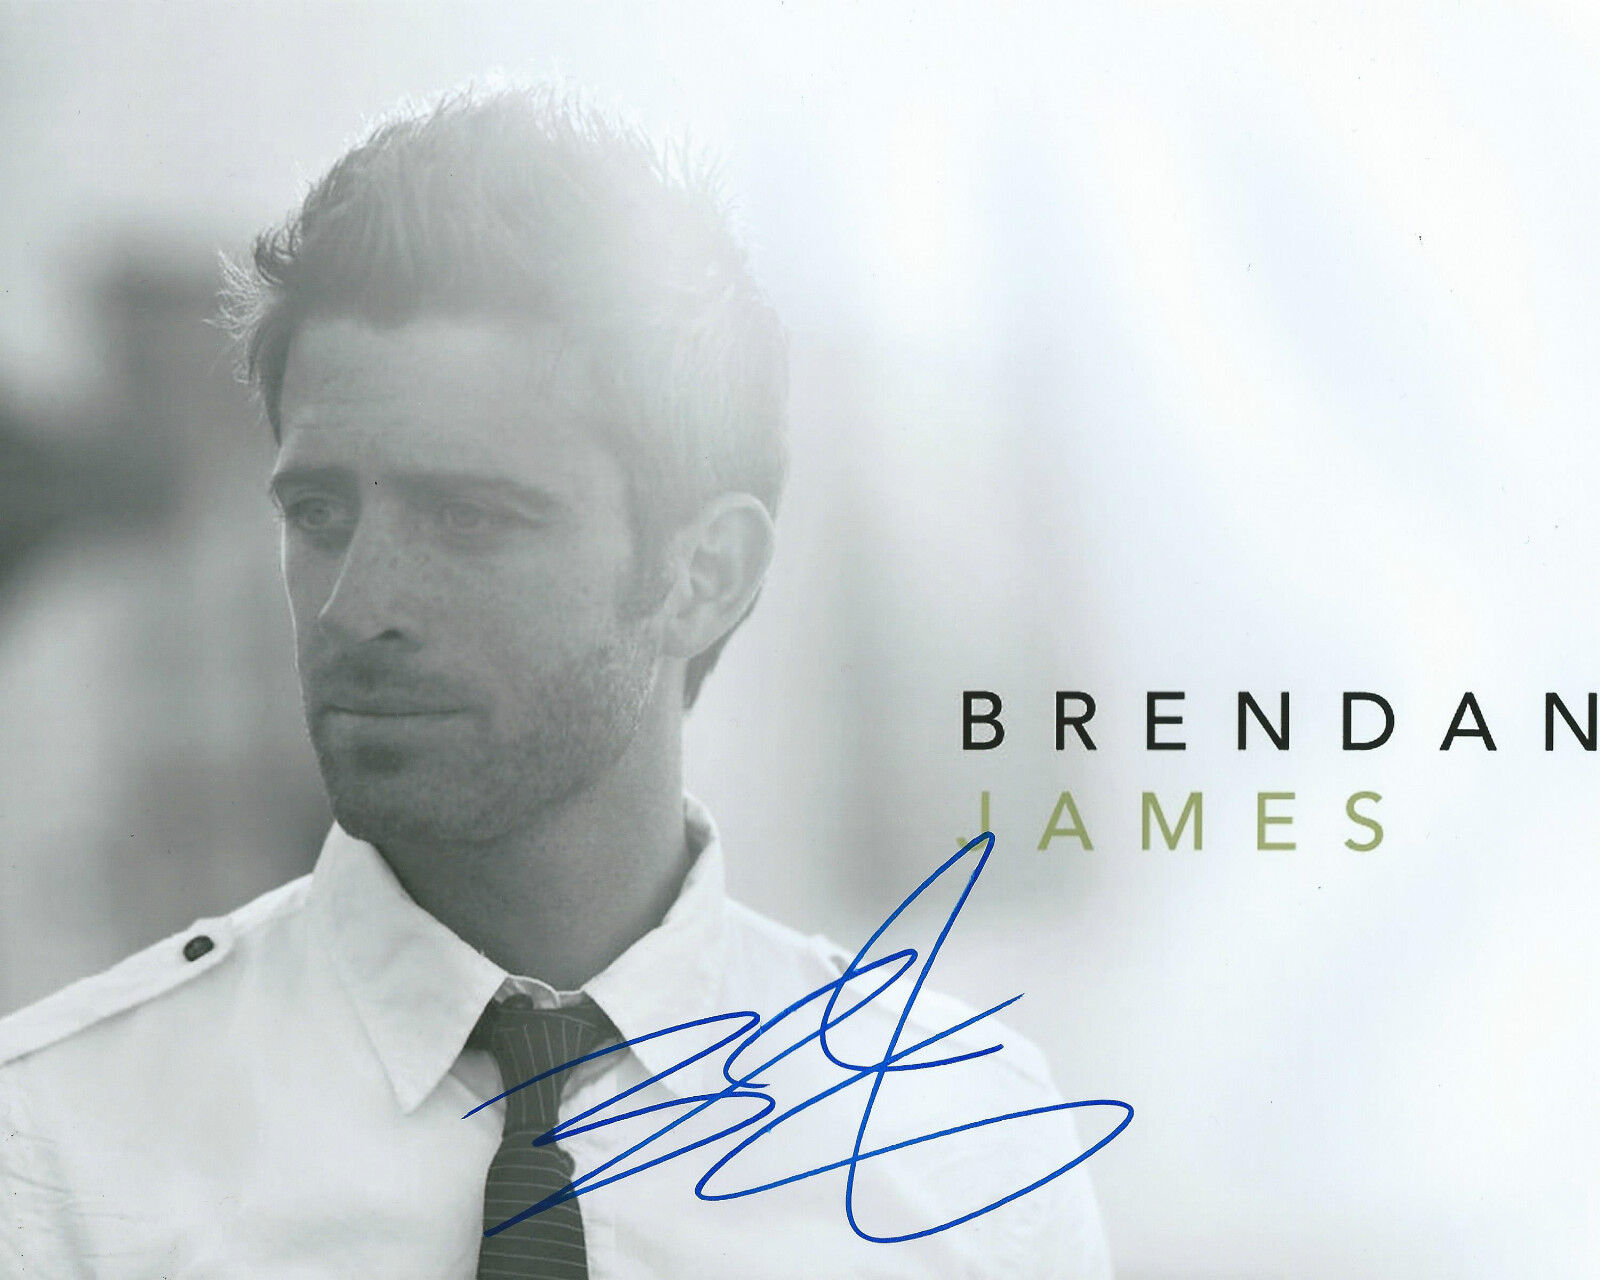 **GFA Hope in Transition *BRENDAN JAMES* Signed 8x10 Photo Poster painting B5 COA PROOF!**